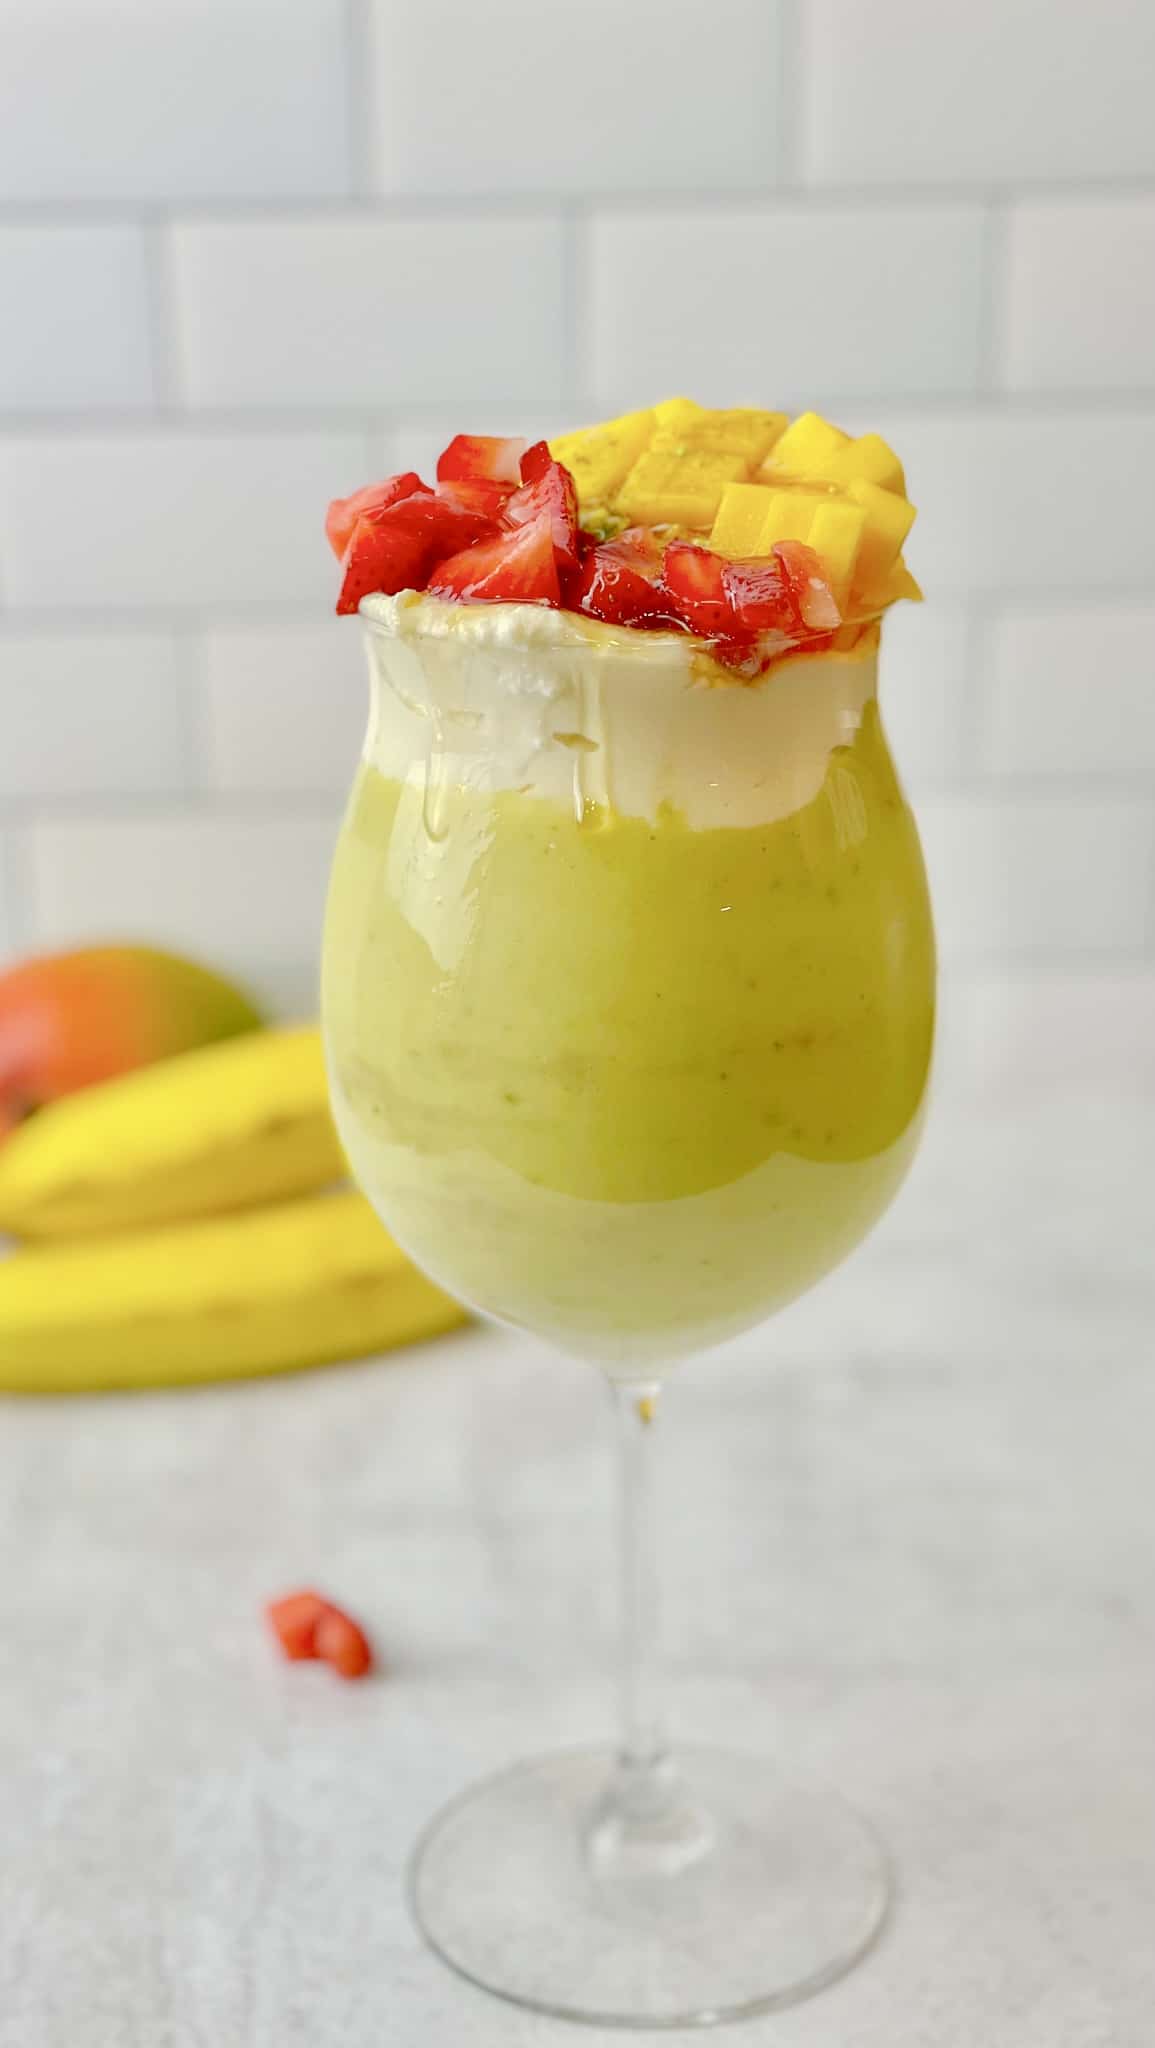 A tasty cool avocado smoothie topped with strawberries and mangoes.